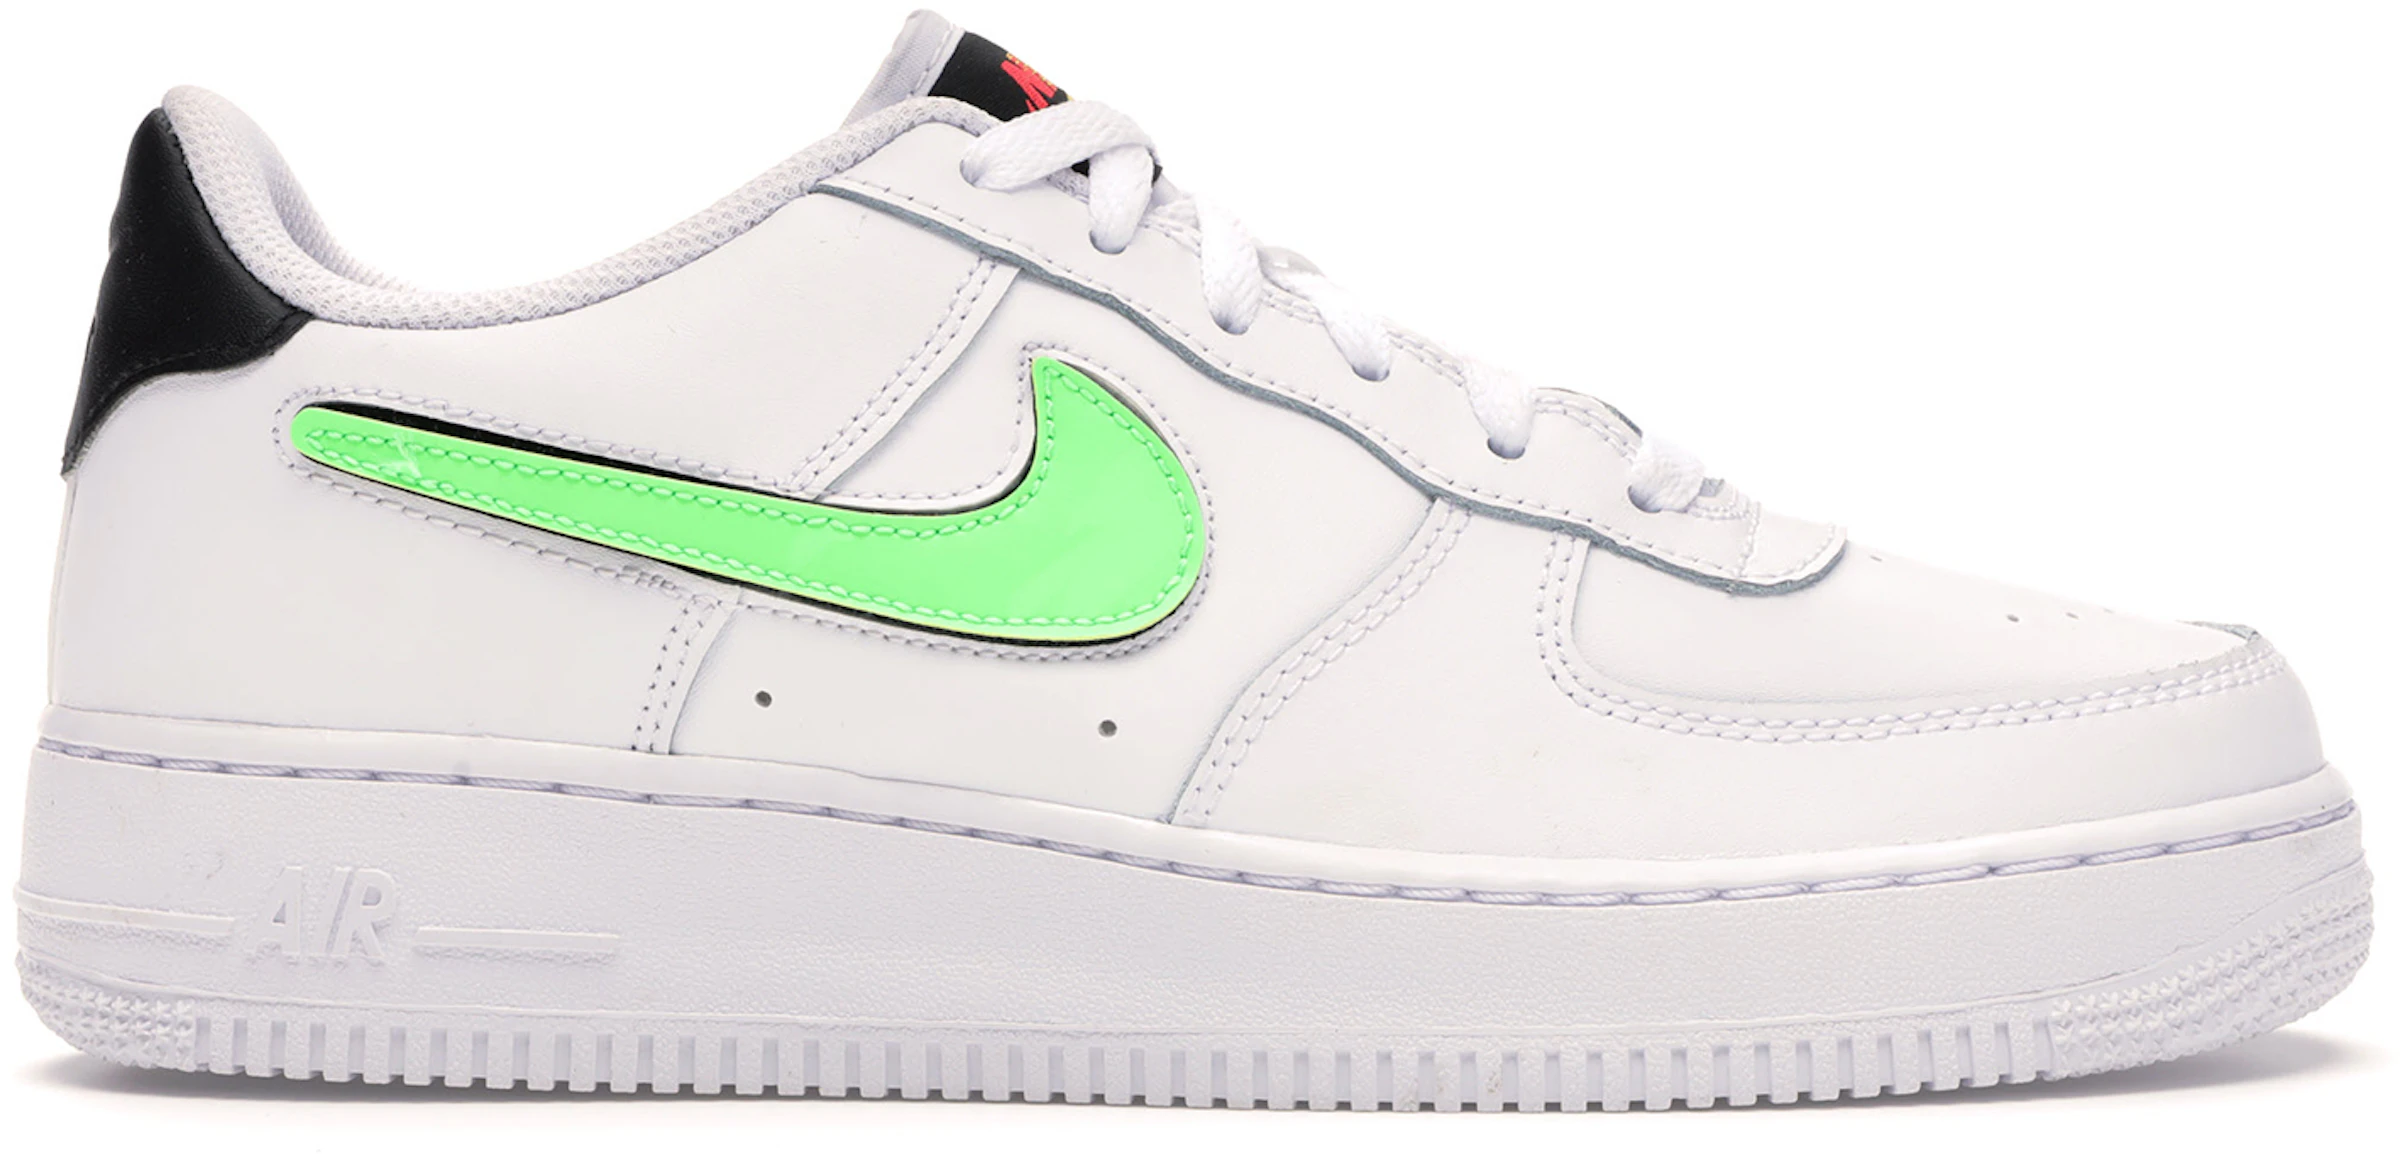 vocal claridad actualizar Nike Air Force 1 Low Removable Swoosh White Green Strike (GS) - AR7446-100  - ES